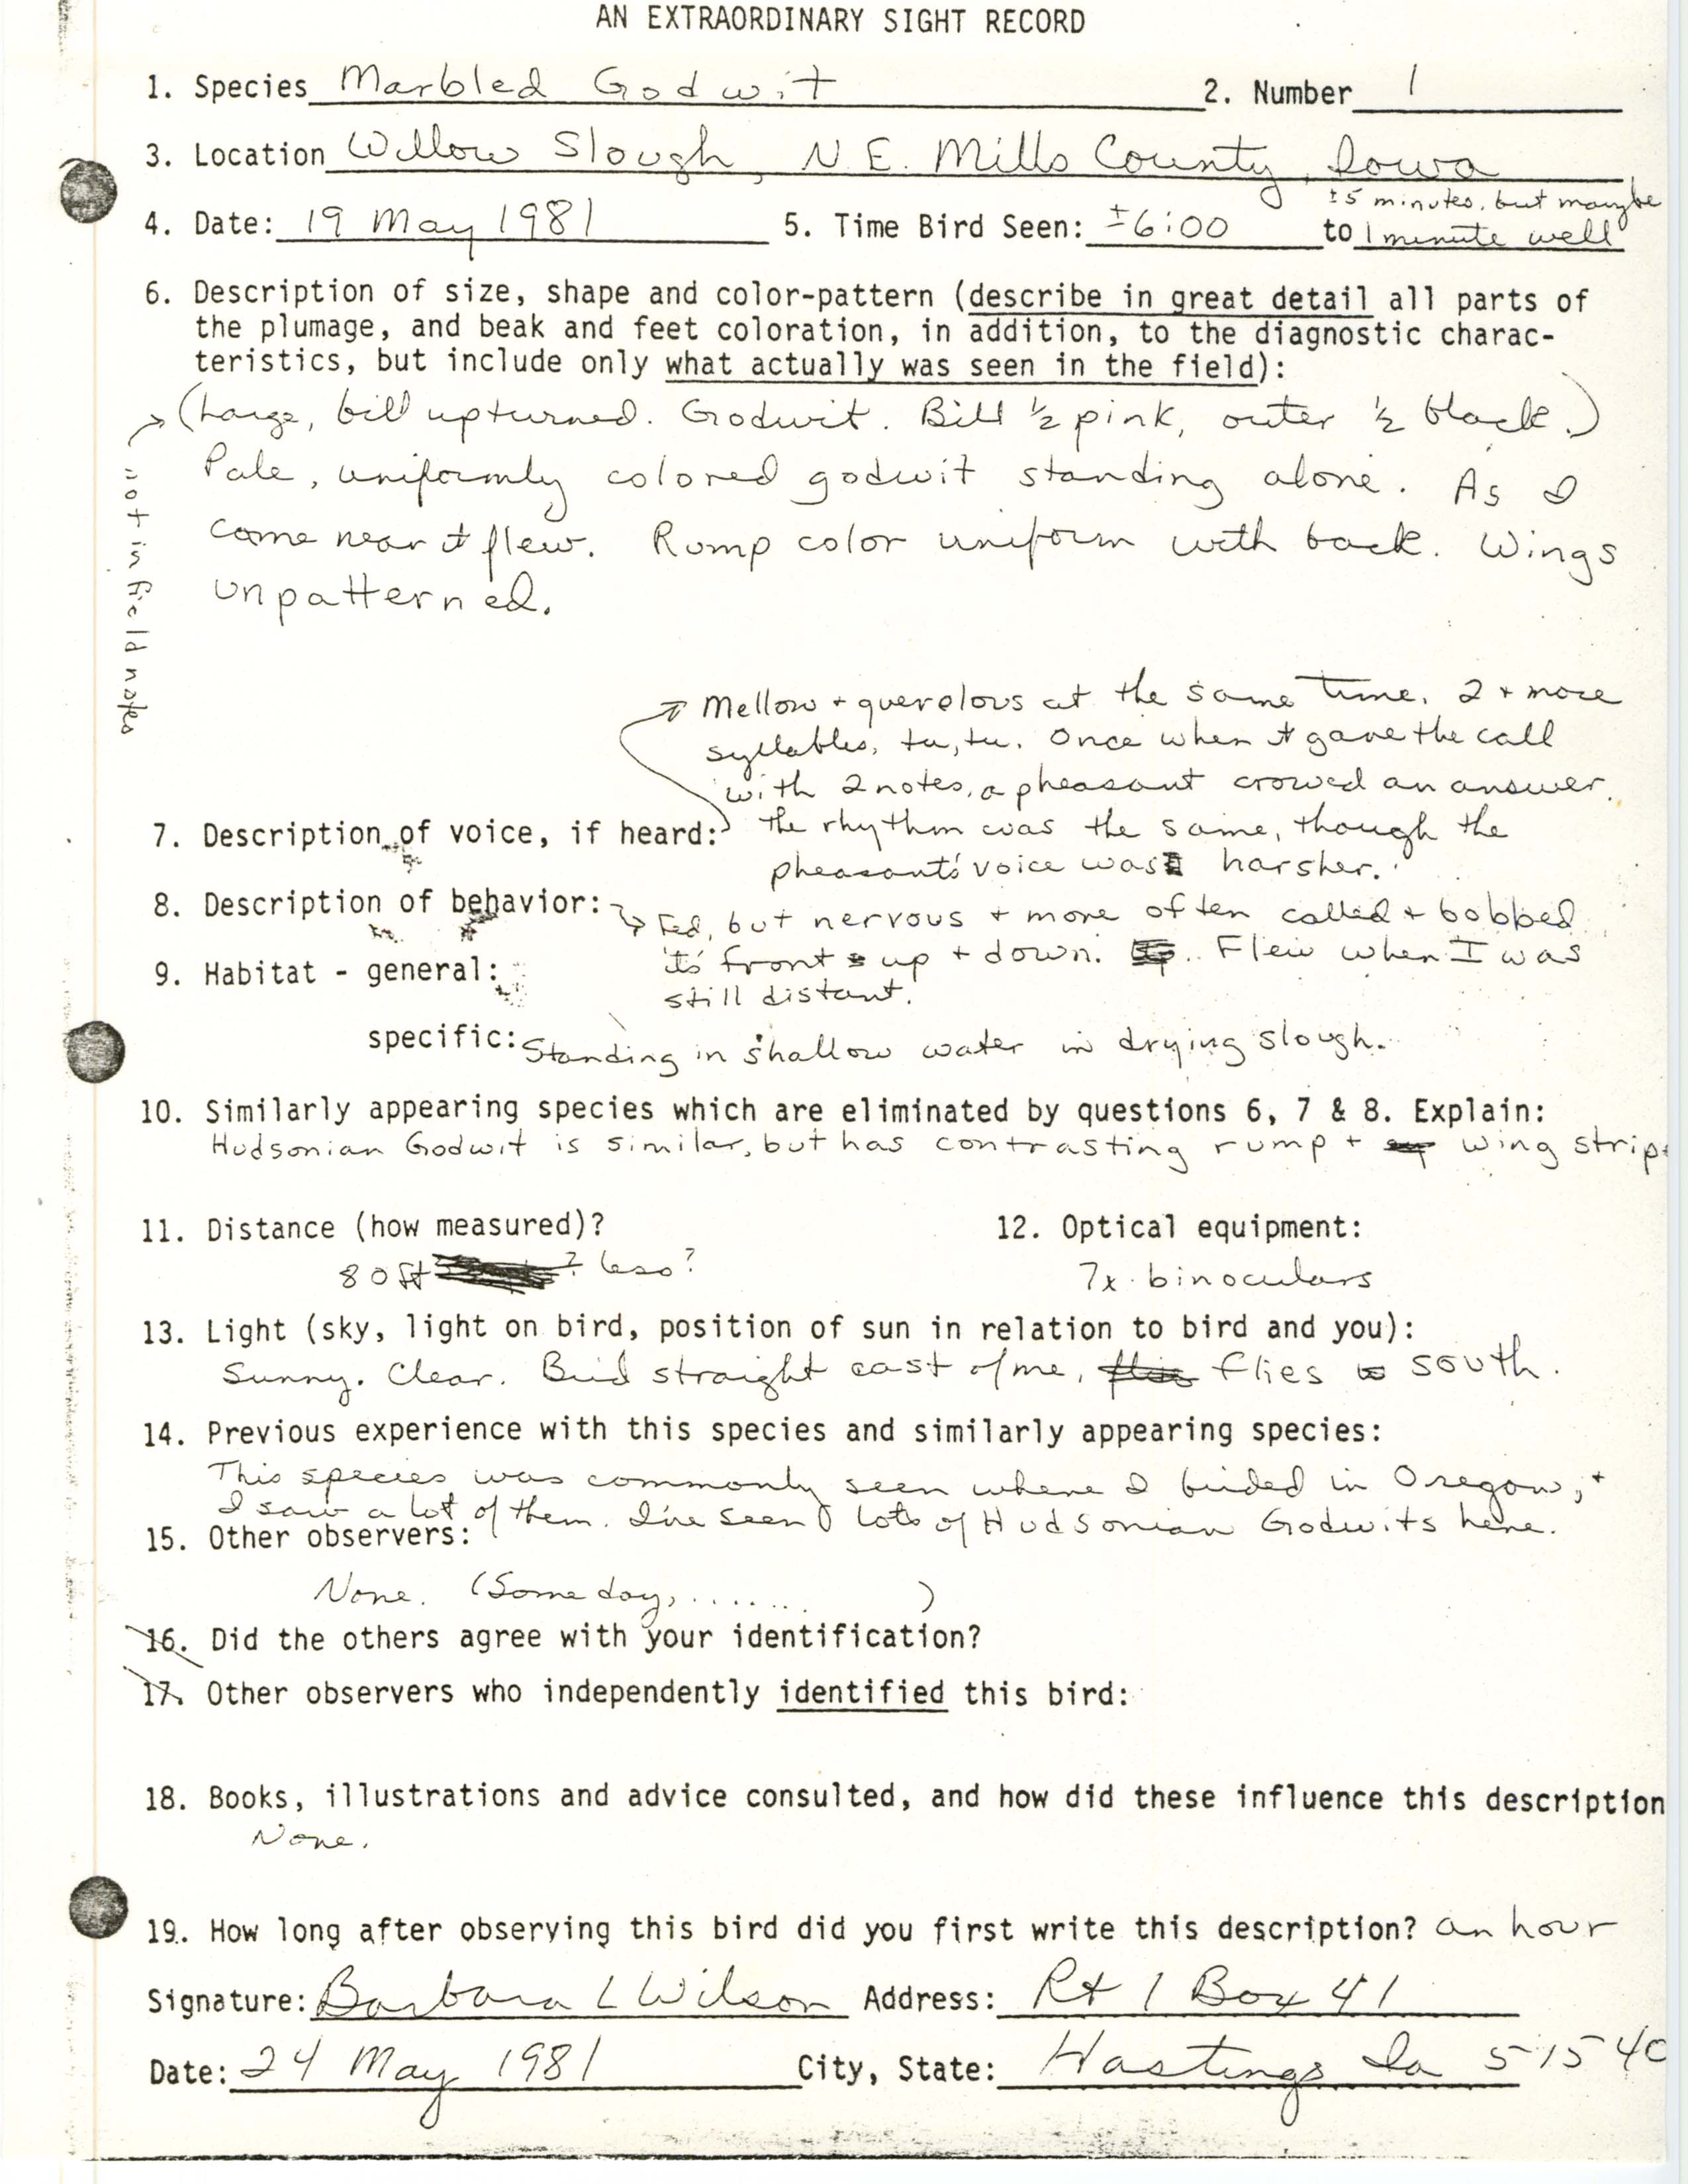 Rare bird documentation form for Marbled Godwit at Willow Slough, 1981